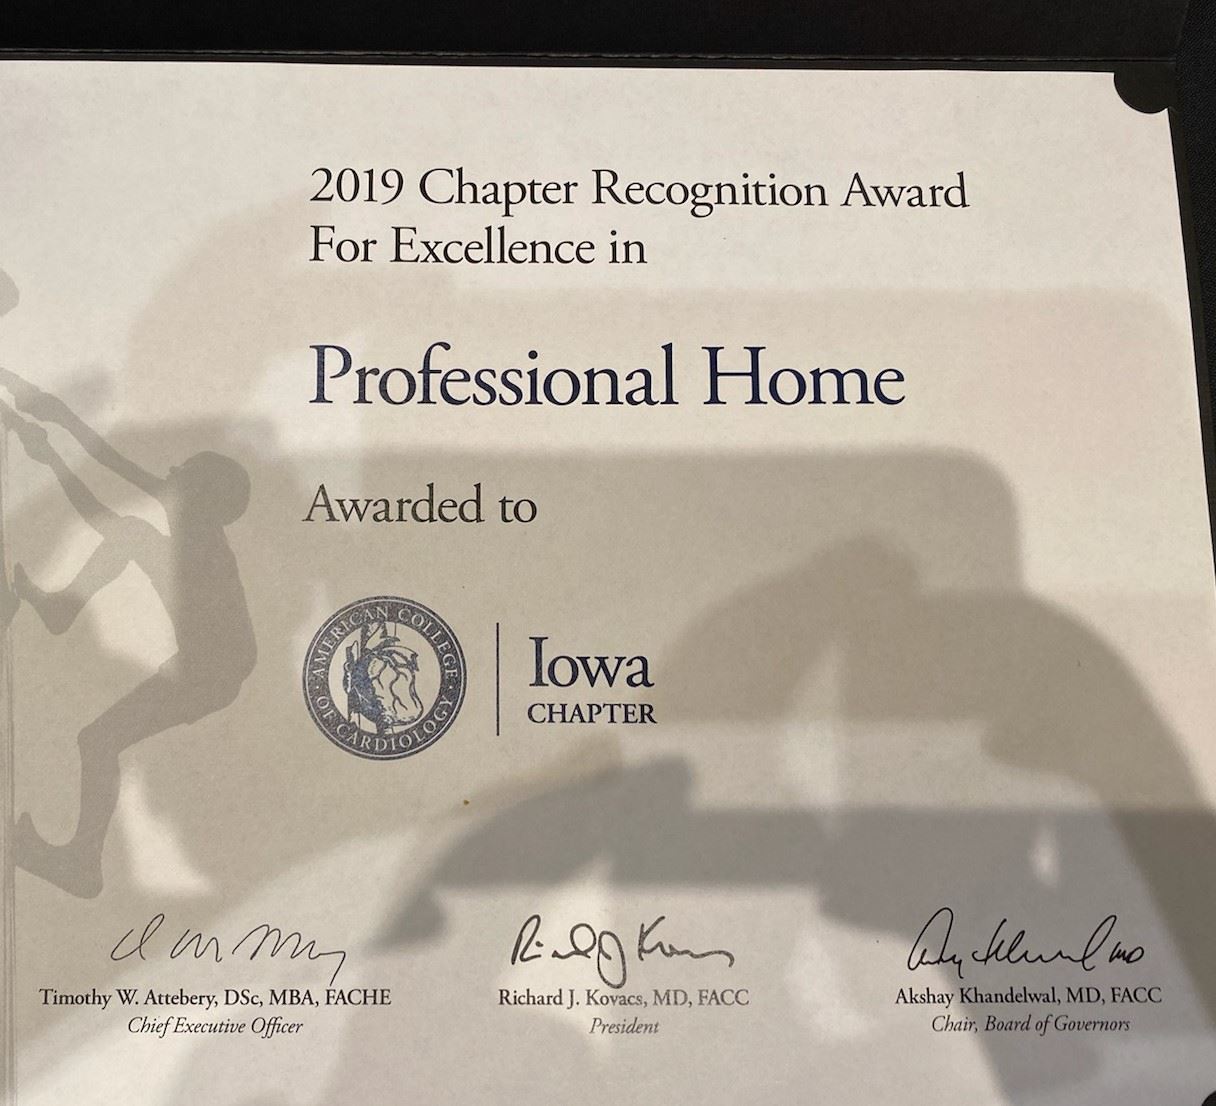 2019 Chapter Recognition Award for Excellence in Professional Home